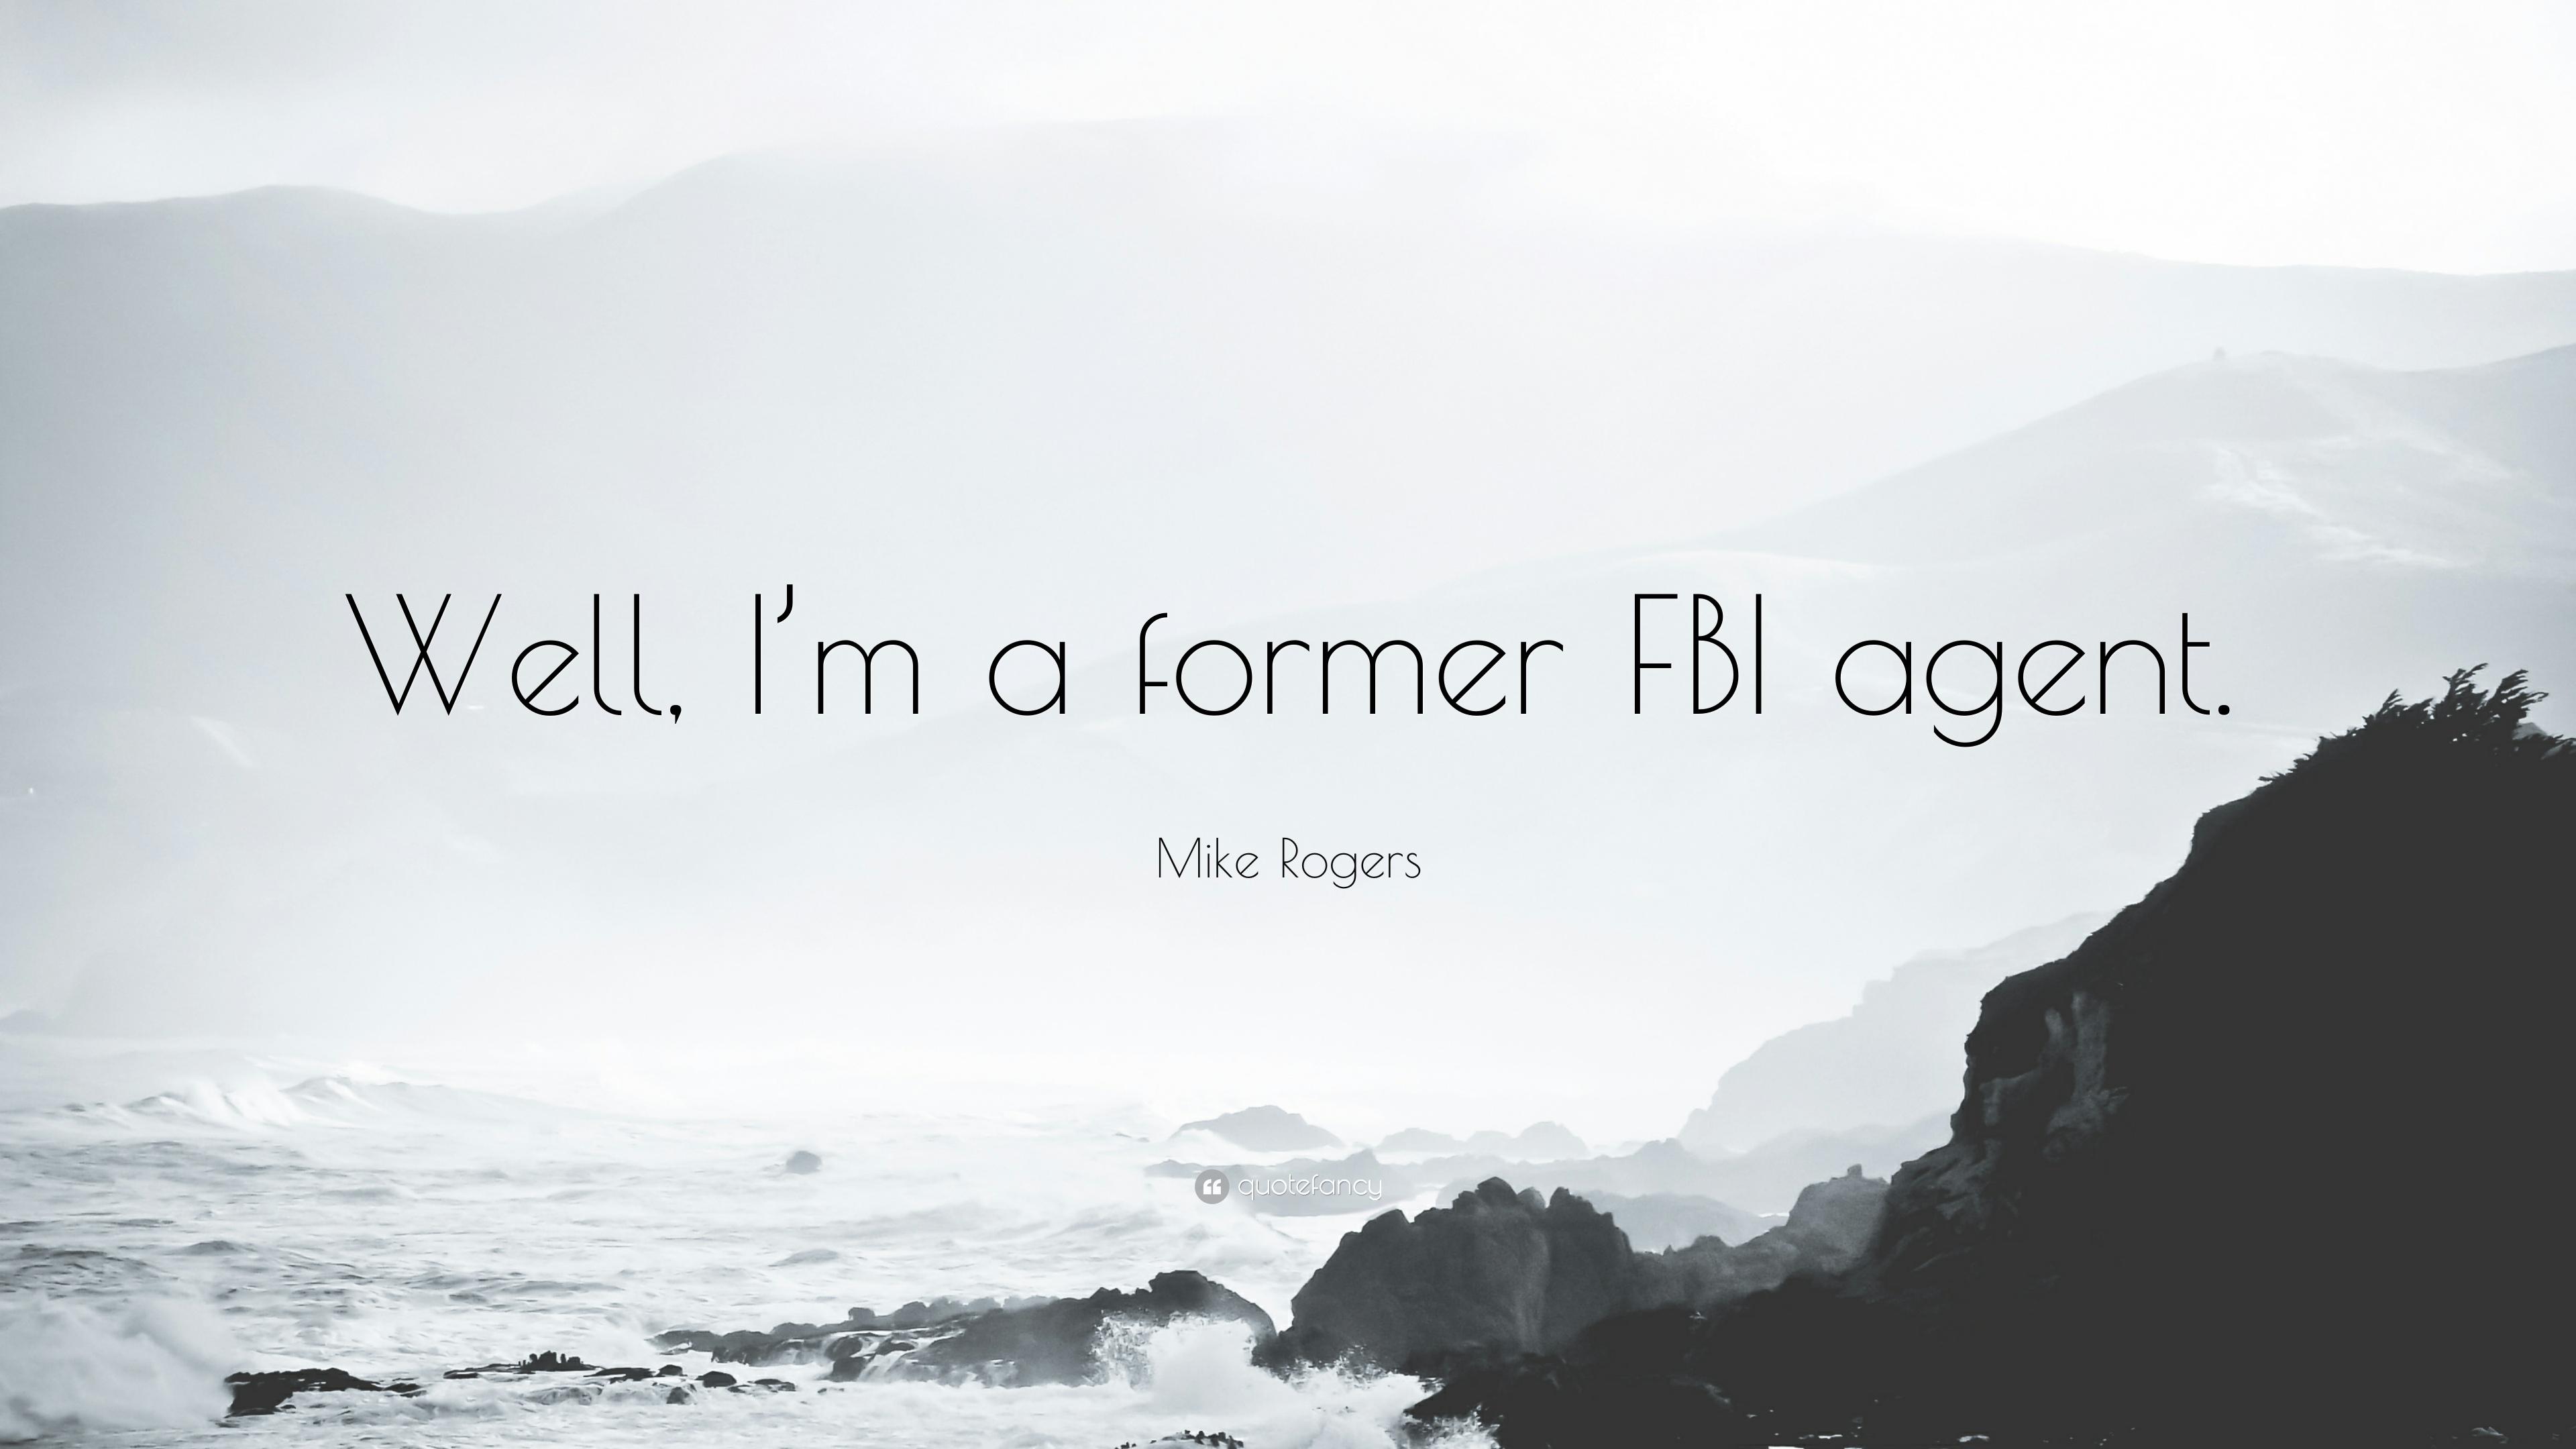 Mike Rogers Quote: “Well, I'm a former FBI agent.” 7